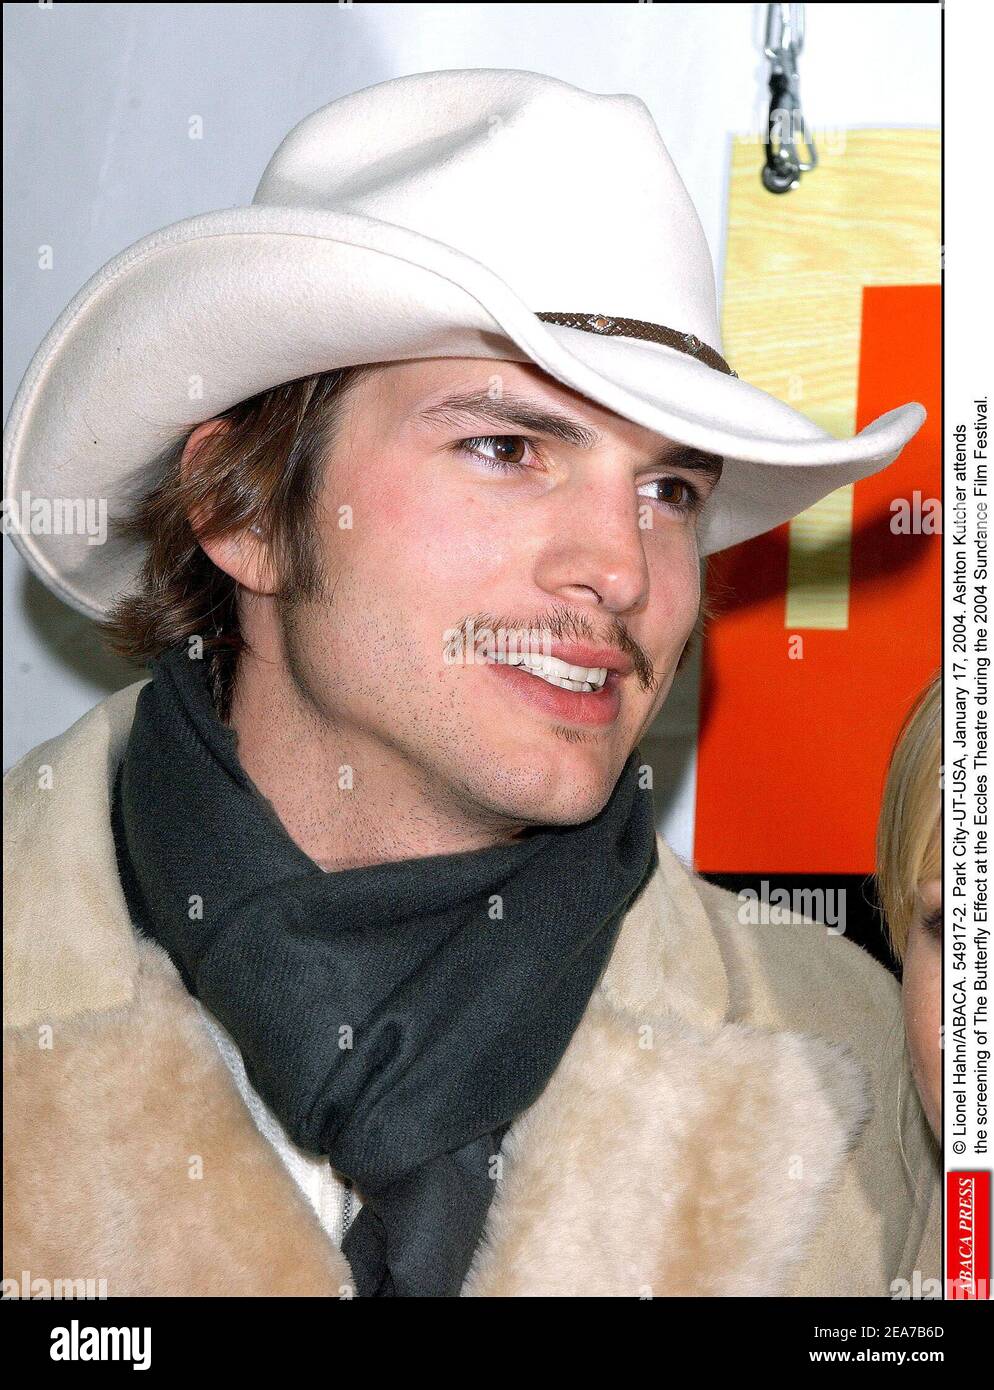 © Lionel Hahn/ABACA. 54917-2. Park City-UT-USA, January 17, 2004. Ashton Kutcher attends the screening of The Butterfly Effect at the Eccles Theatre during the 2004 Sundance Film Festival. Stock Photo